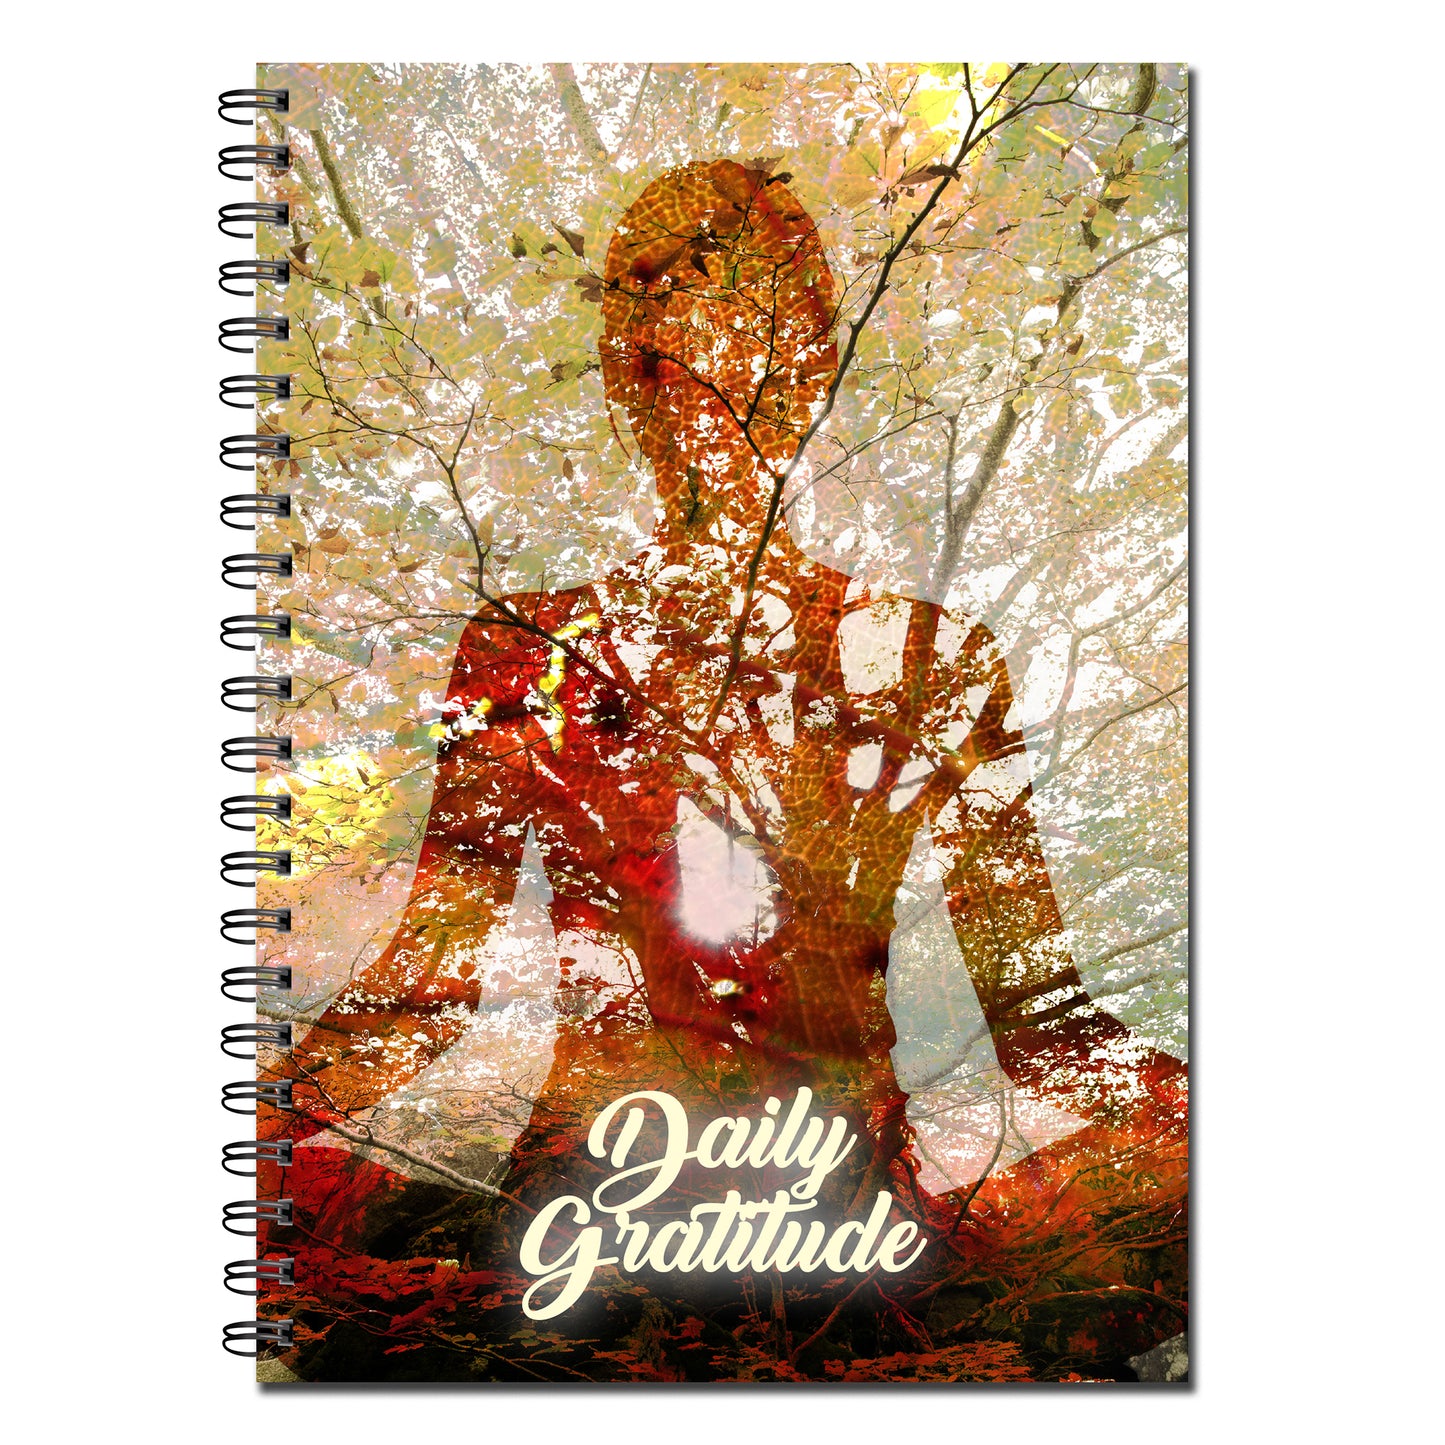 Daily Gratitude Journal | Thankful | Grateful | A5 wirobound book | 1 Full Year | 53 pages printed to both sides on quality 120gsm